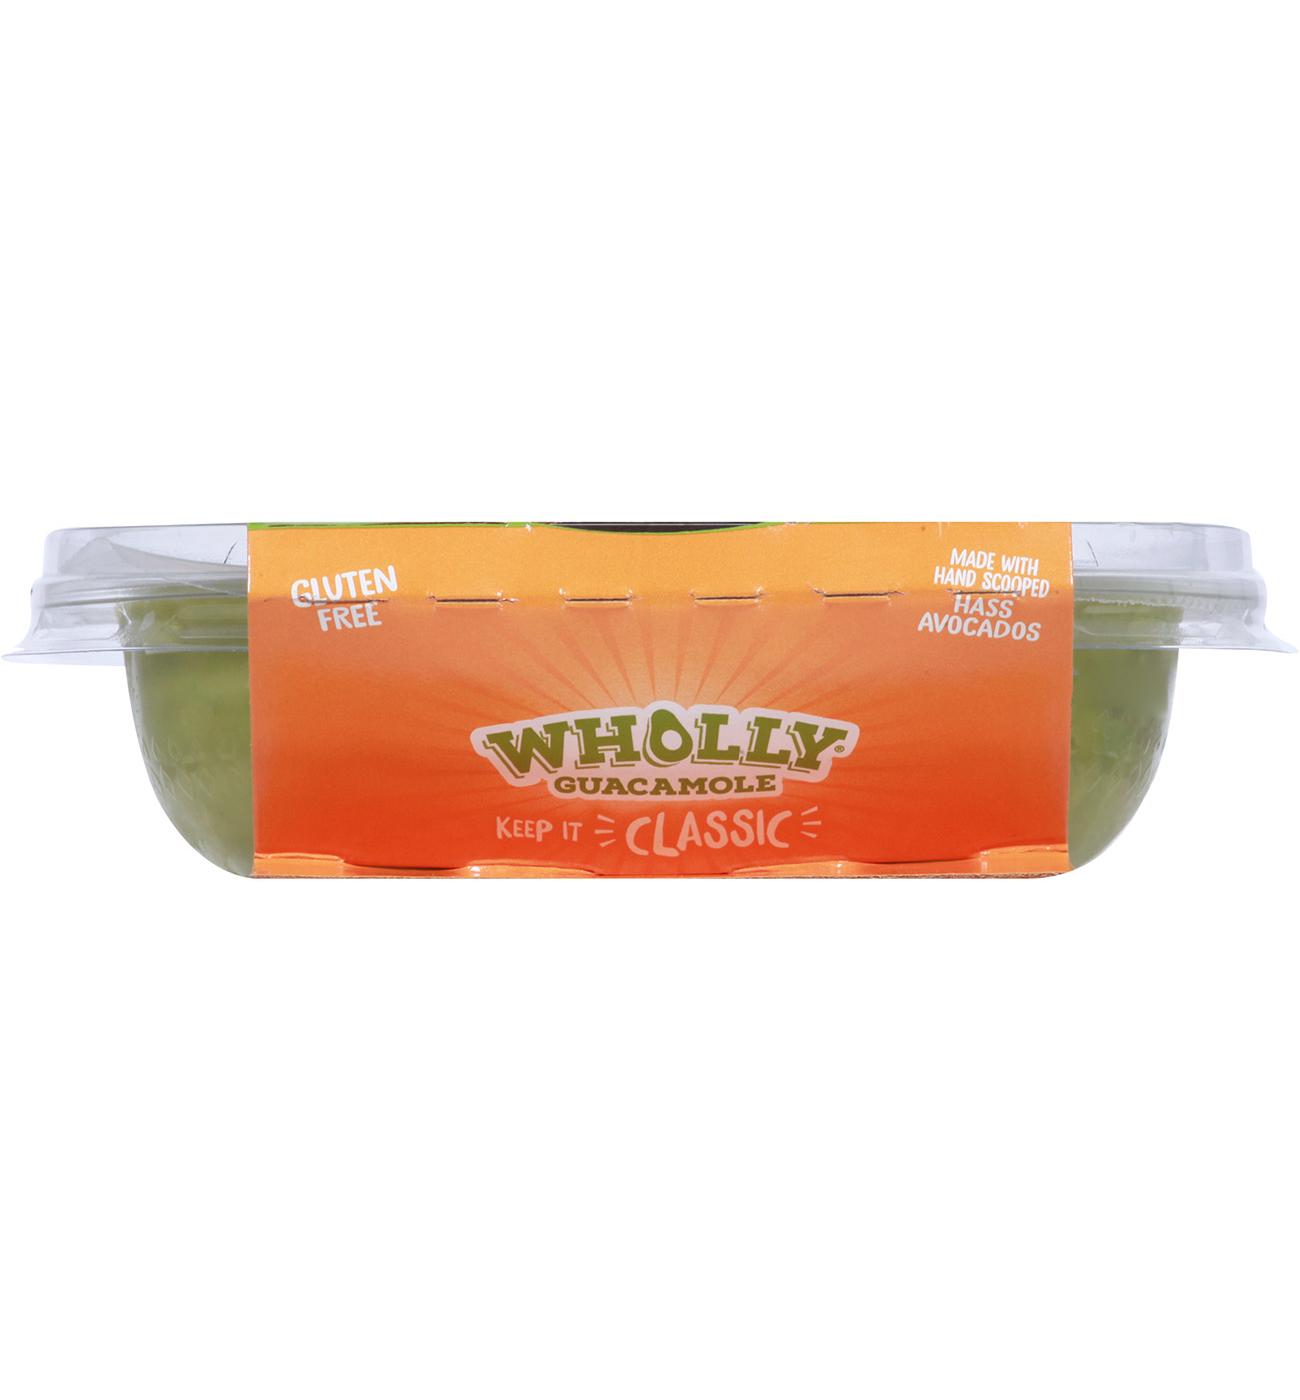 WHOLLY Guacamole Classic - Mild; image 2 of 3